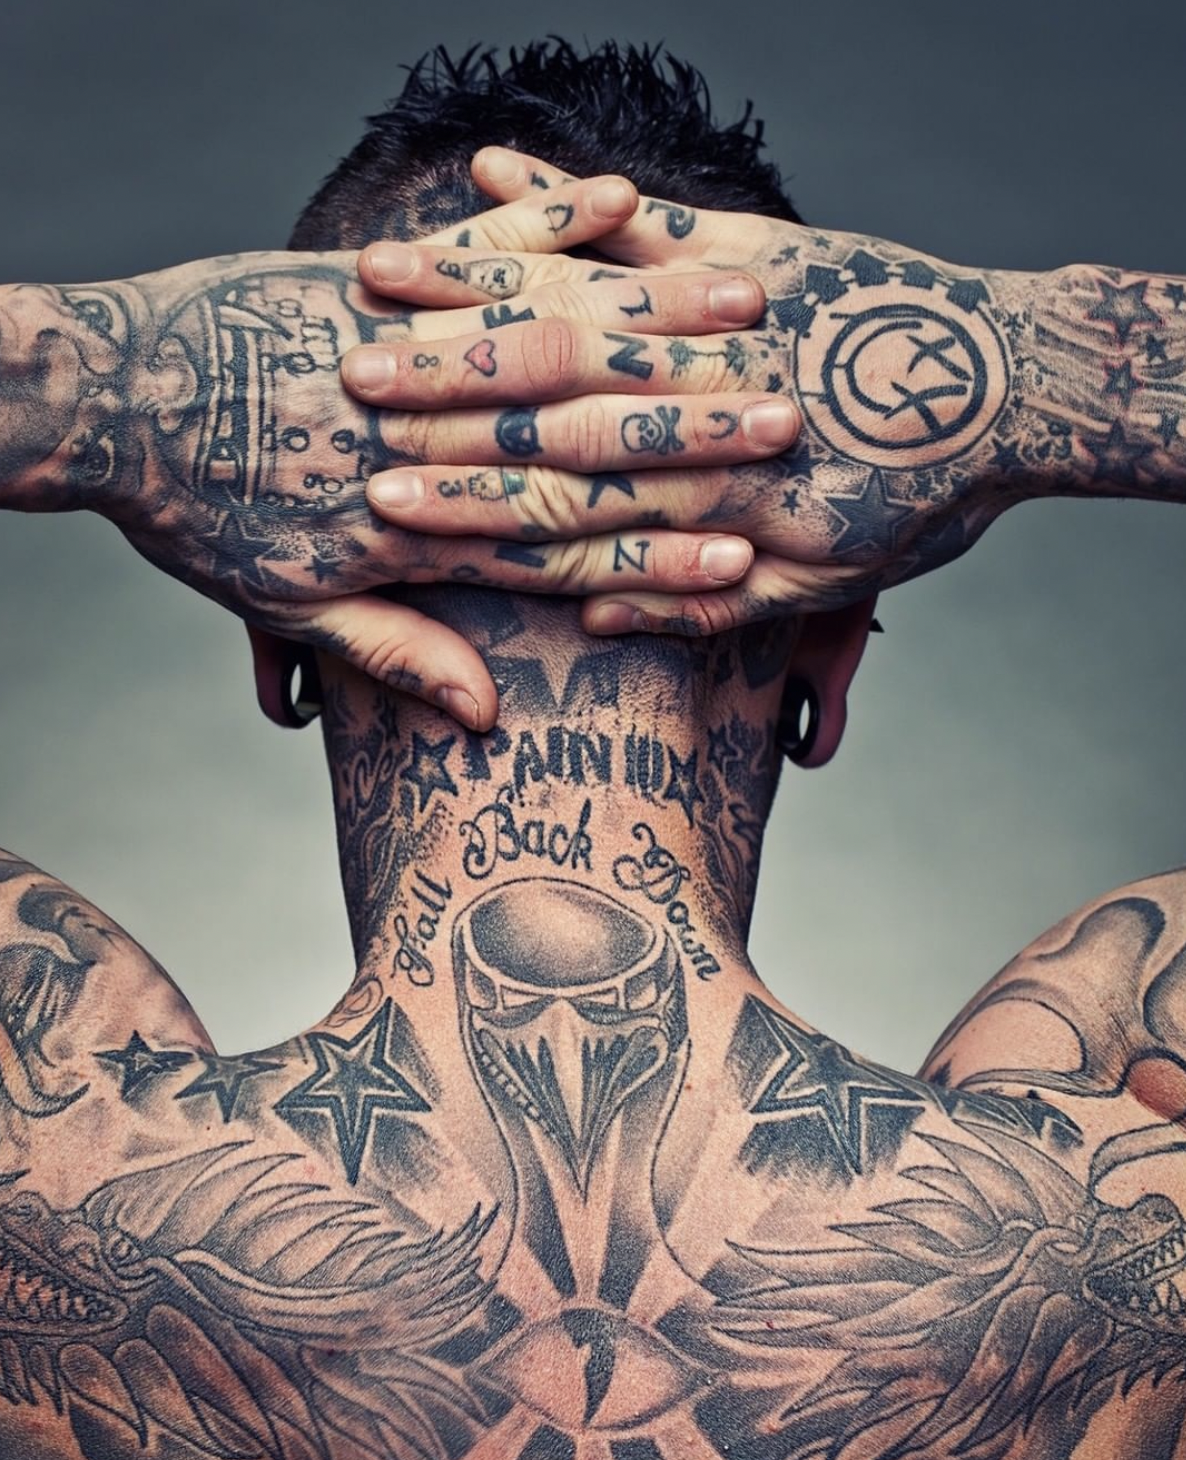 Which celebrities have the most tattoos? - dragonskincare